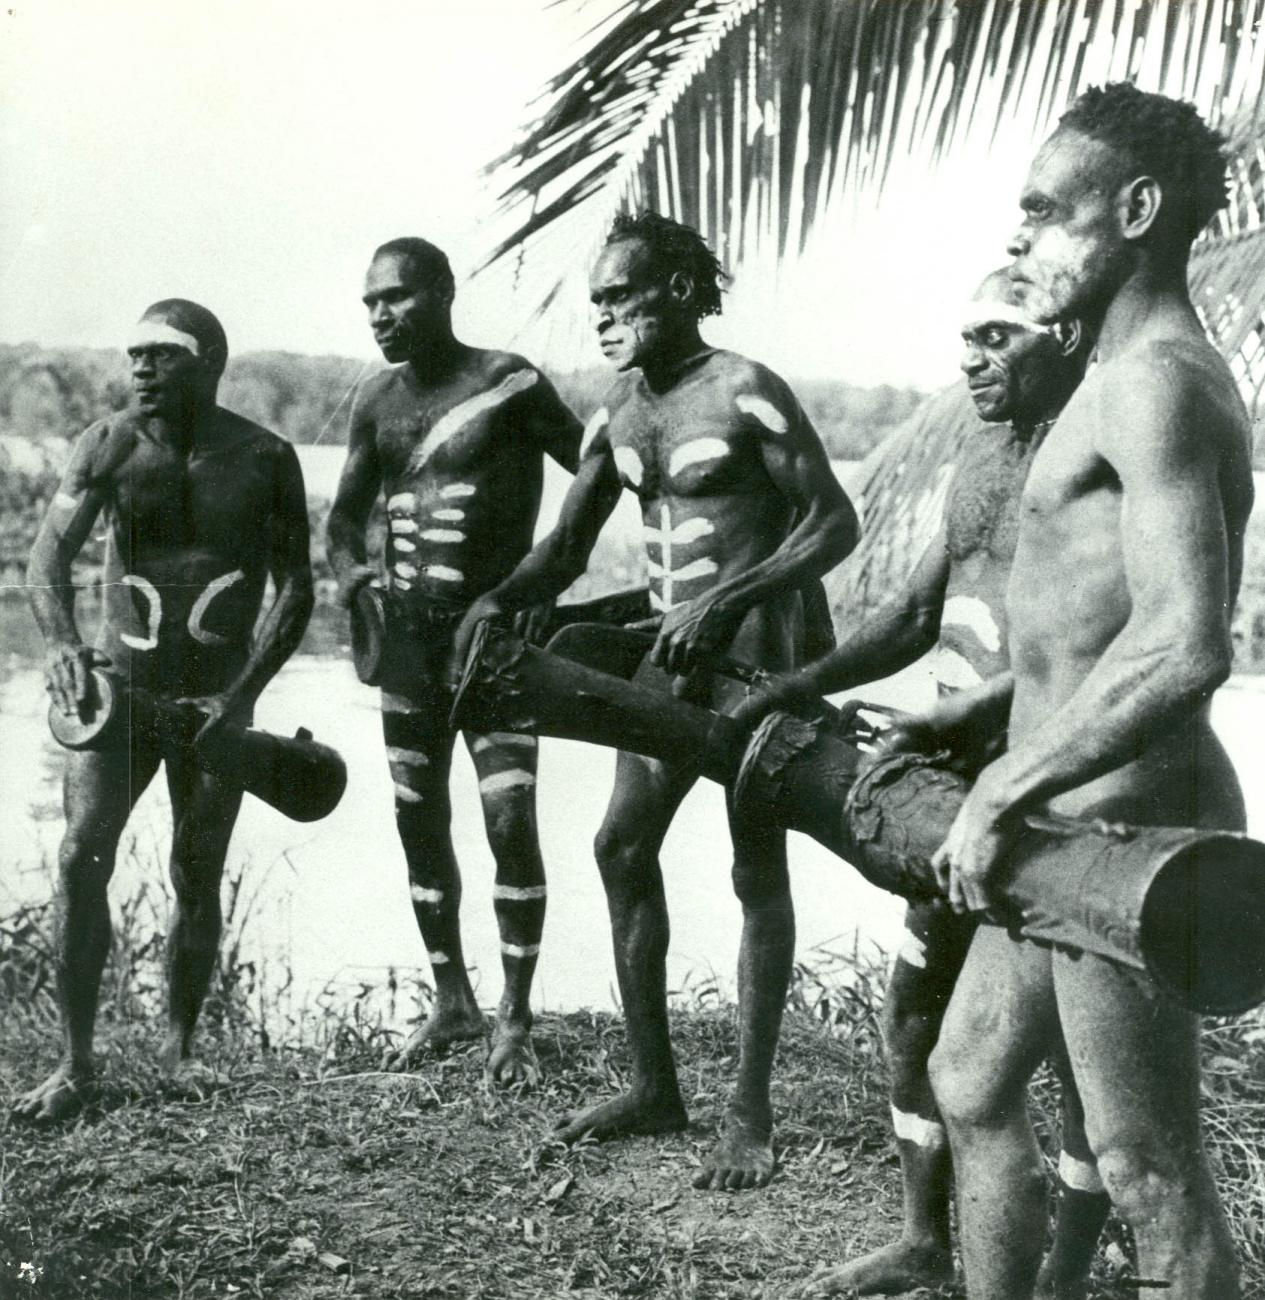 BD/40/52 - 
Group of painted Asmat people with drums
